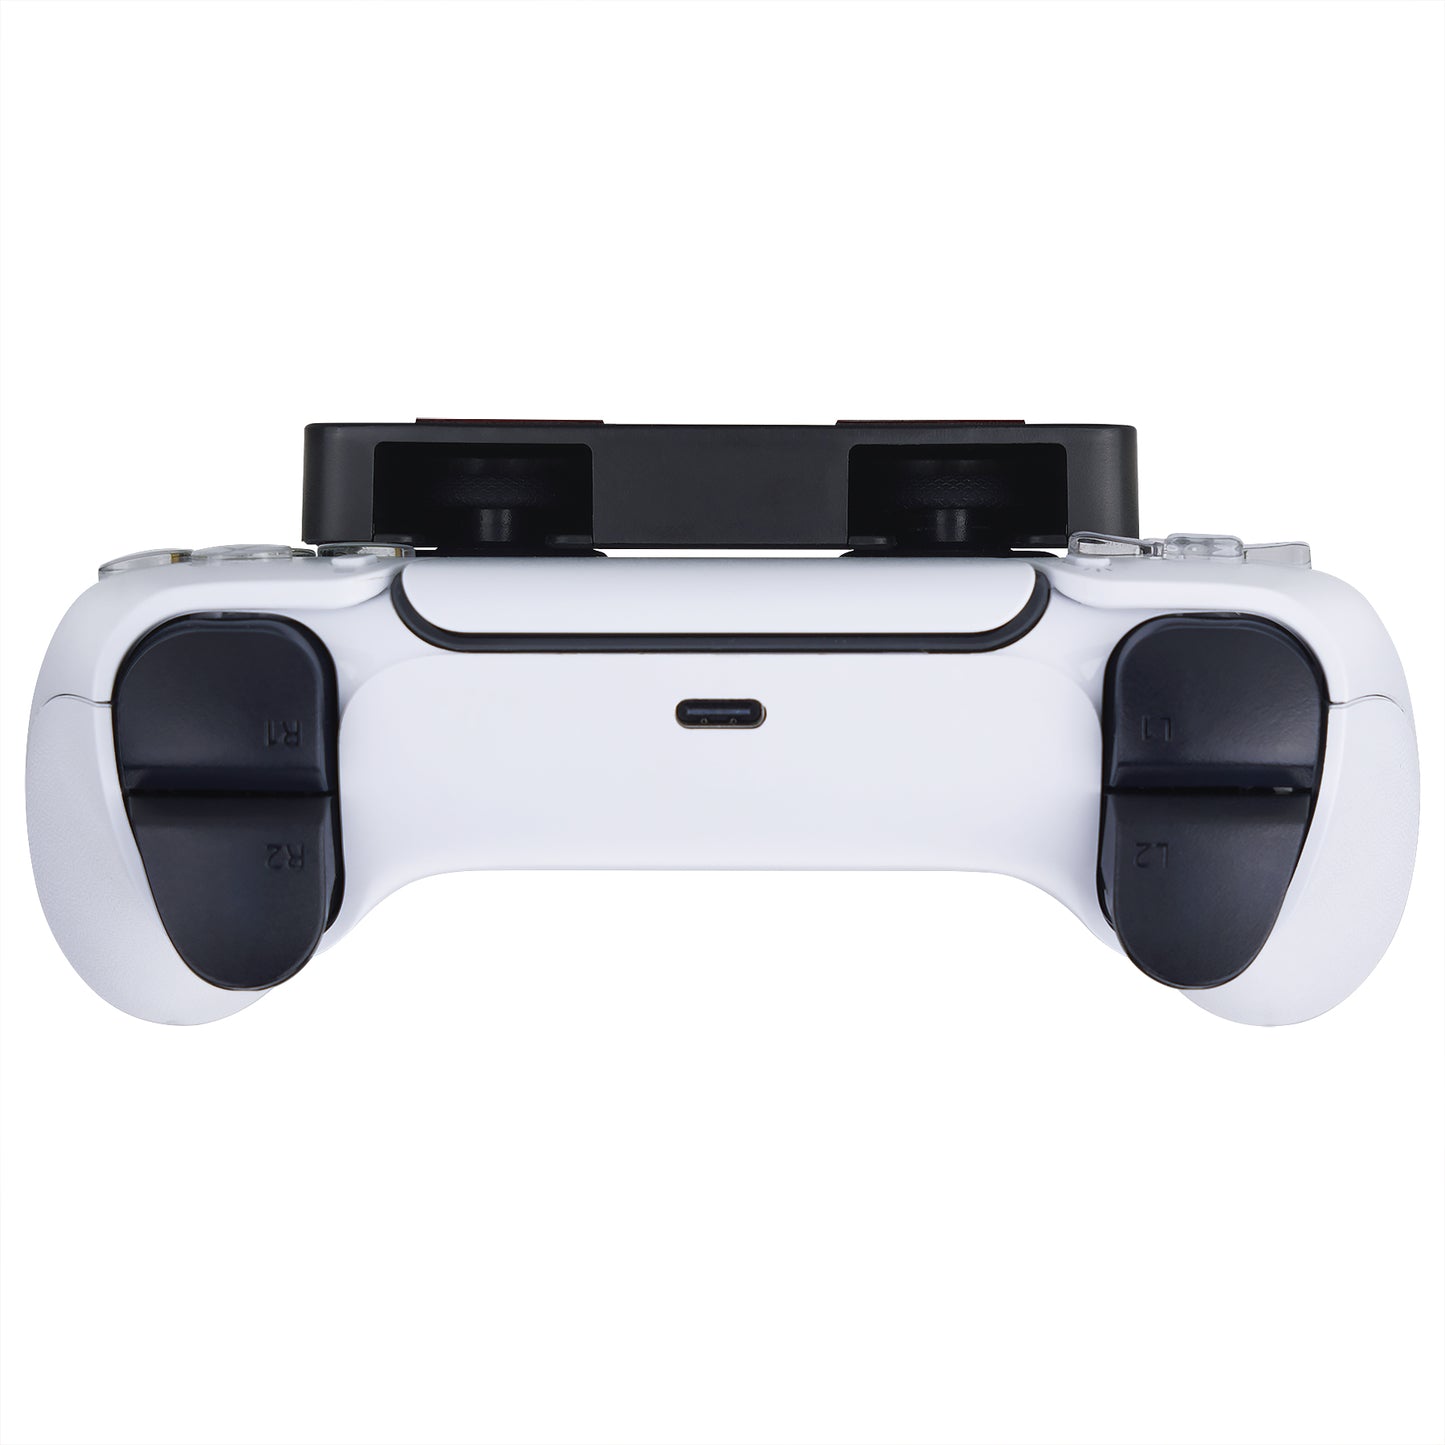 LBECLEY Cronus Zen Ps5 Game One/ Multifunction Bracket Controller Ps5//  Mount Stand for Game Accessories Photography Accessories White One Size 